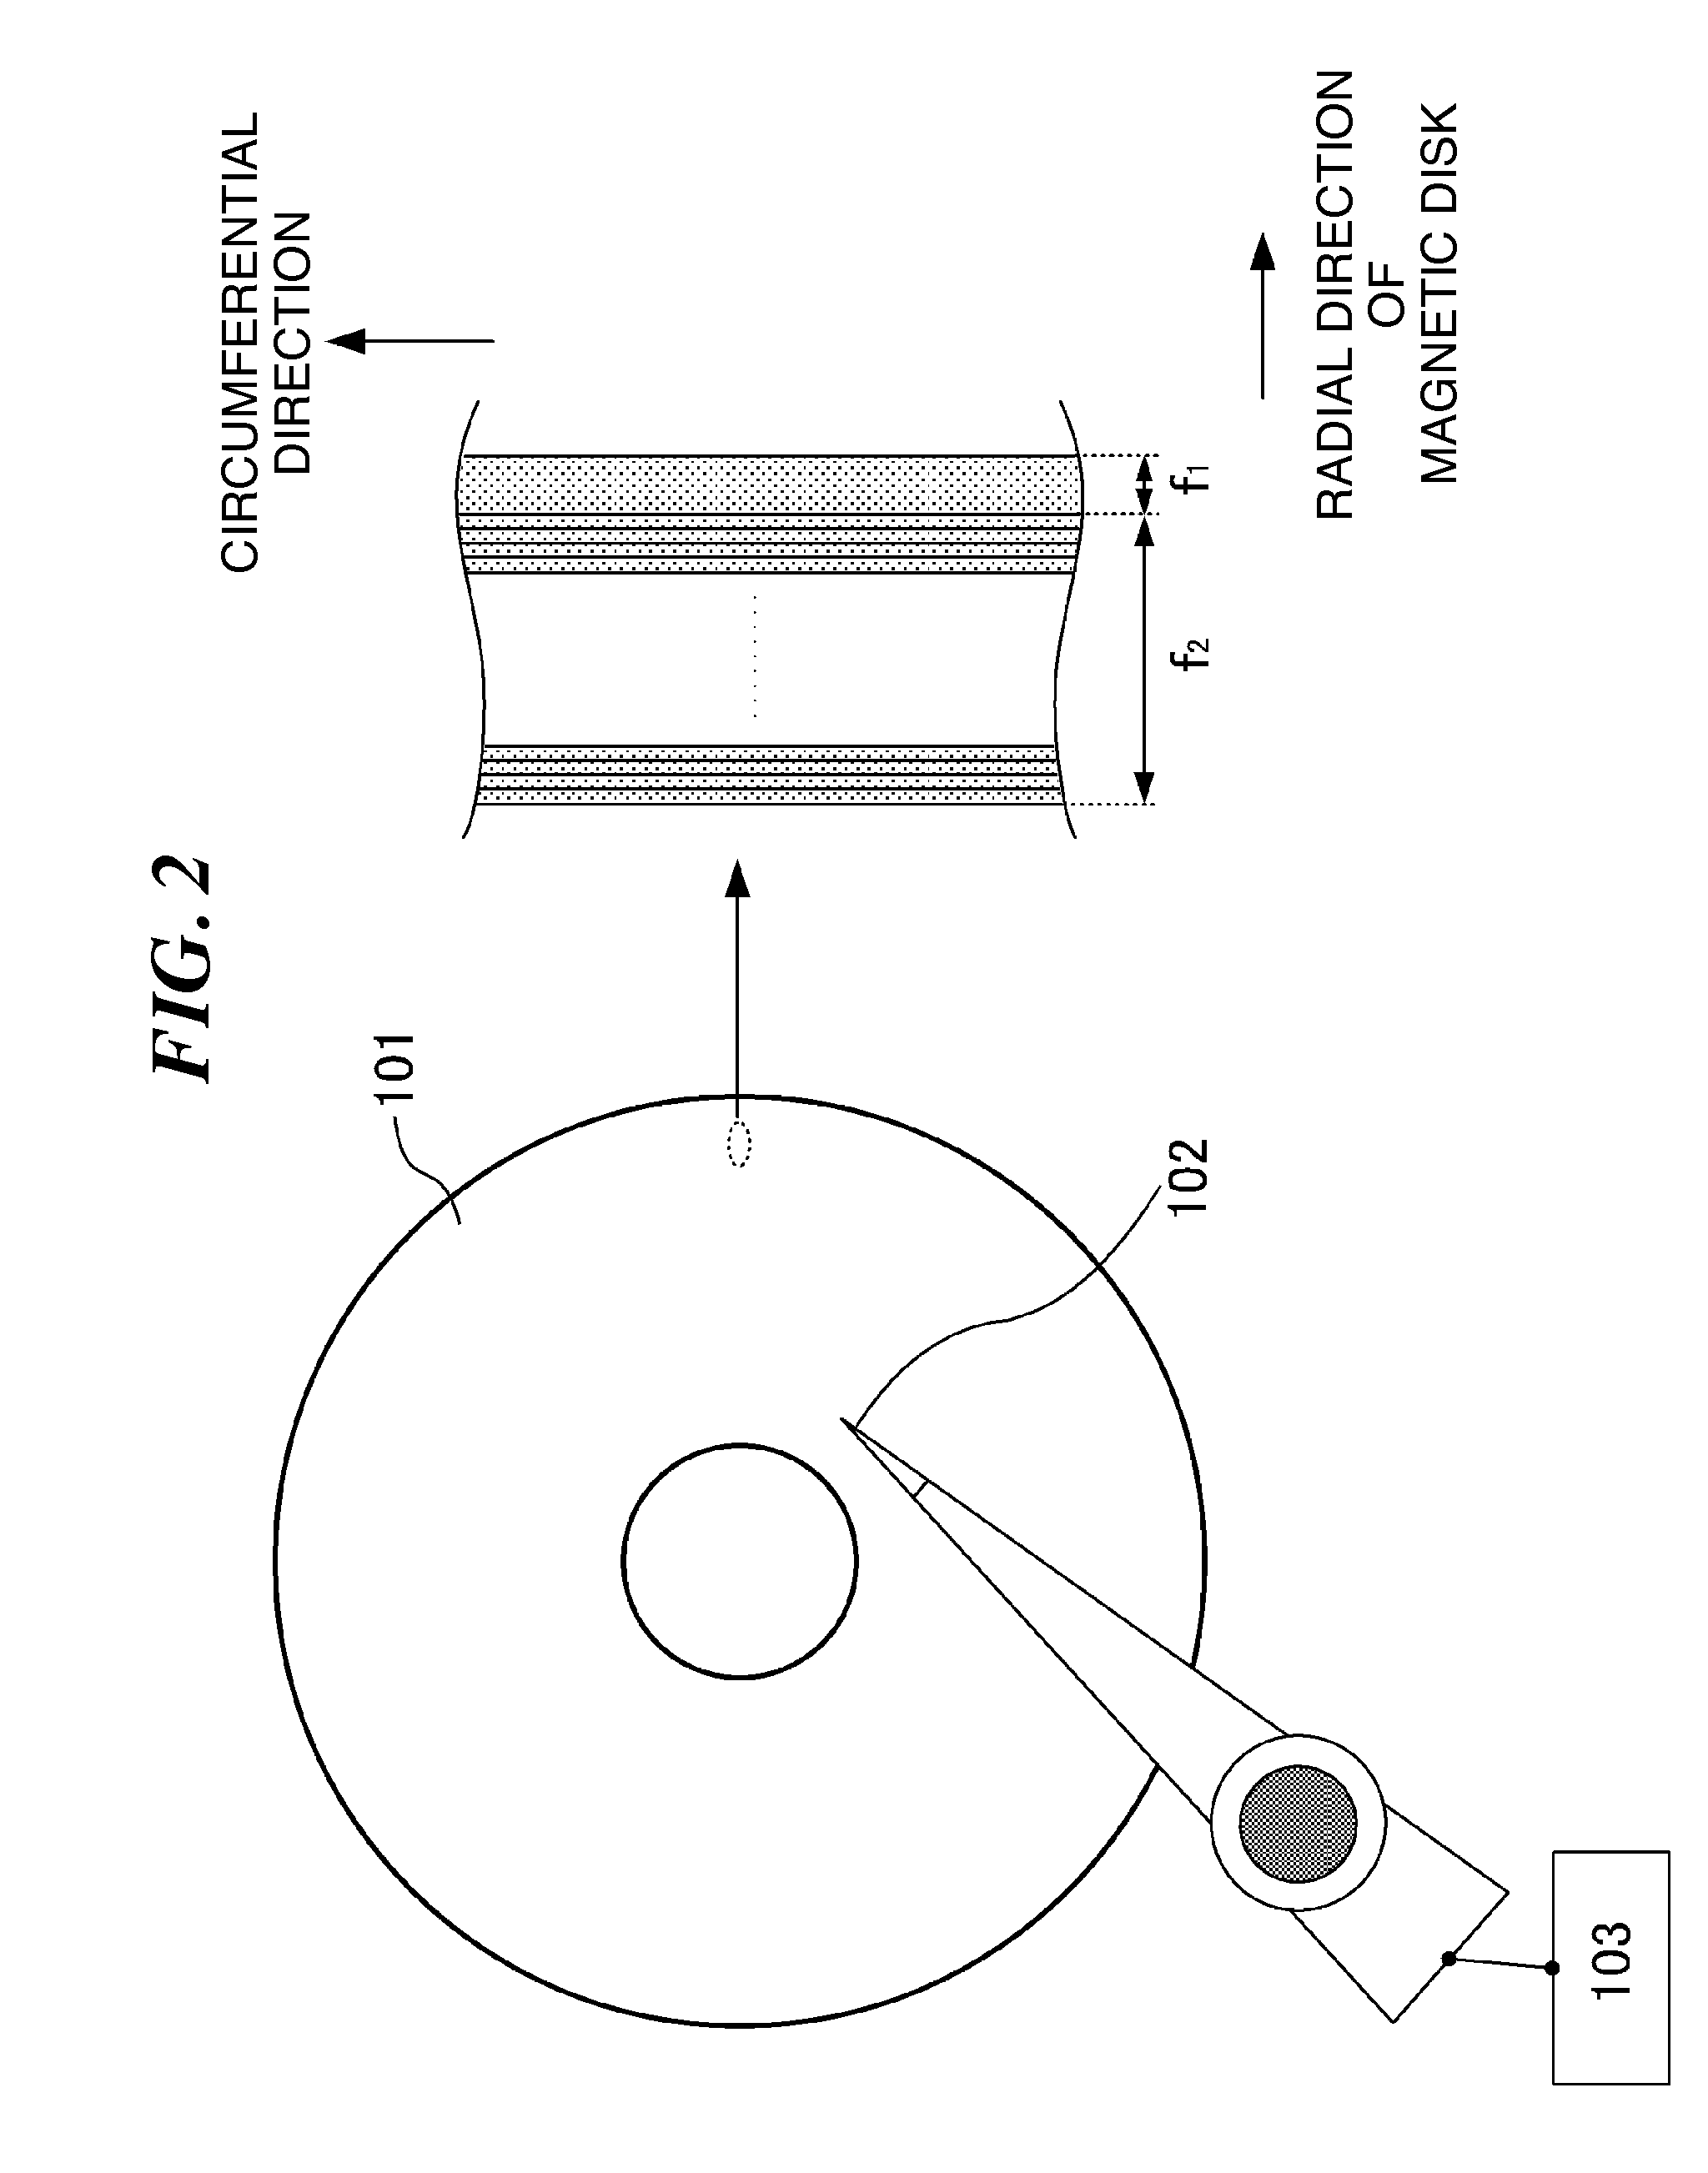 Apparatus of magnetic disc